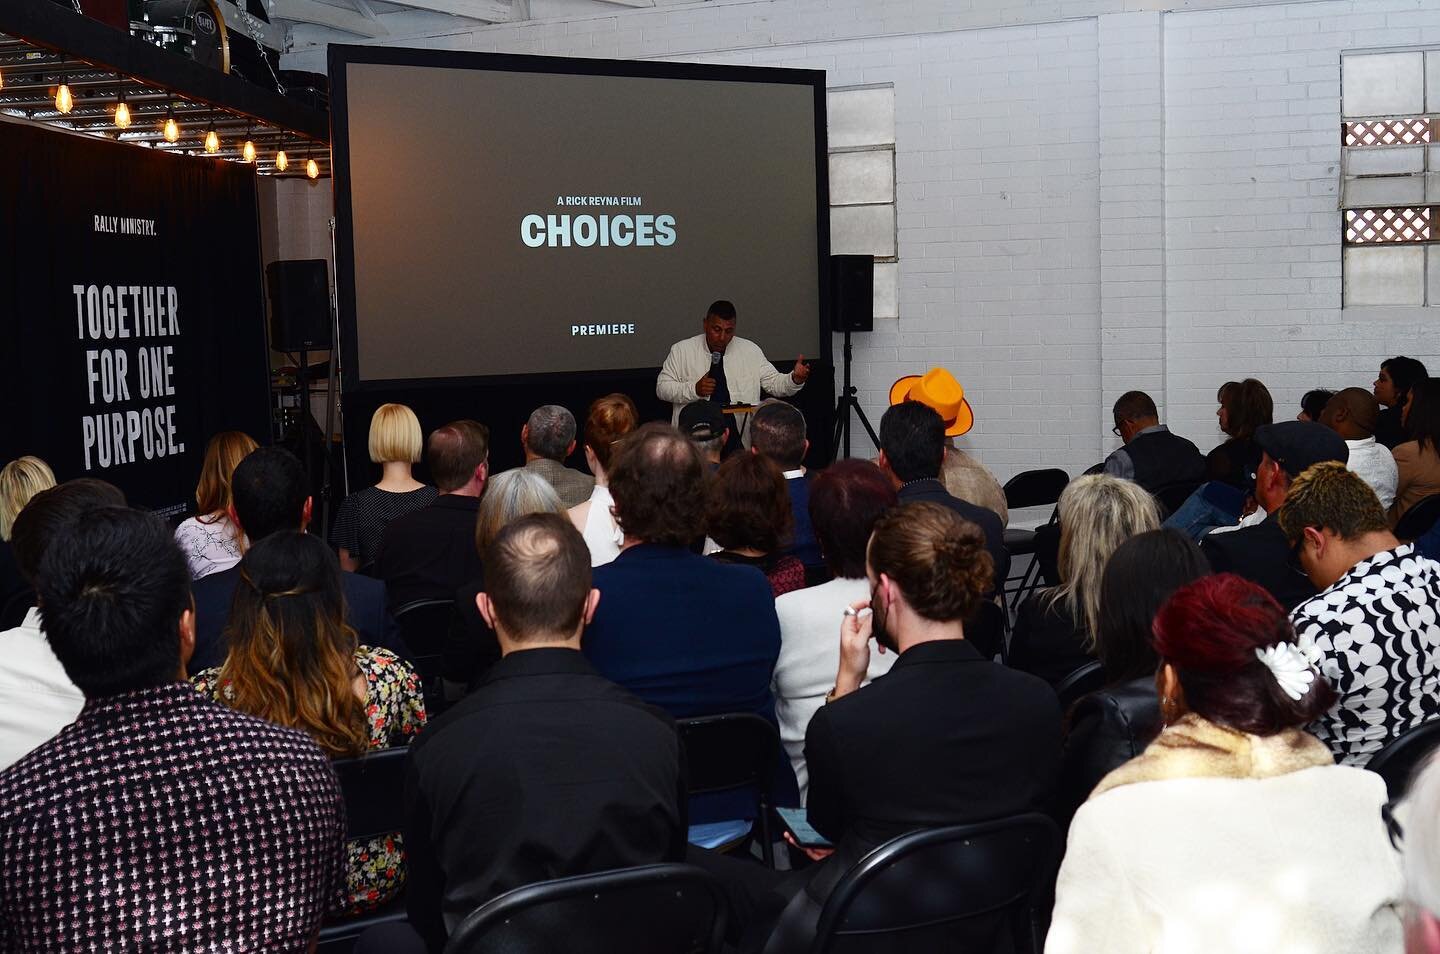 On May 1st, we had the opportunity to host the premiere for Choices. During that premiere, we got to share our heart when it comes to this short film, as well as the vision for Rally Ministry. What a night we had! We are so thankful for those who cam